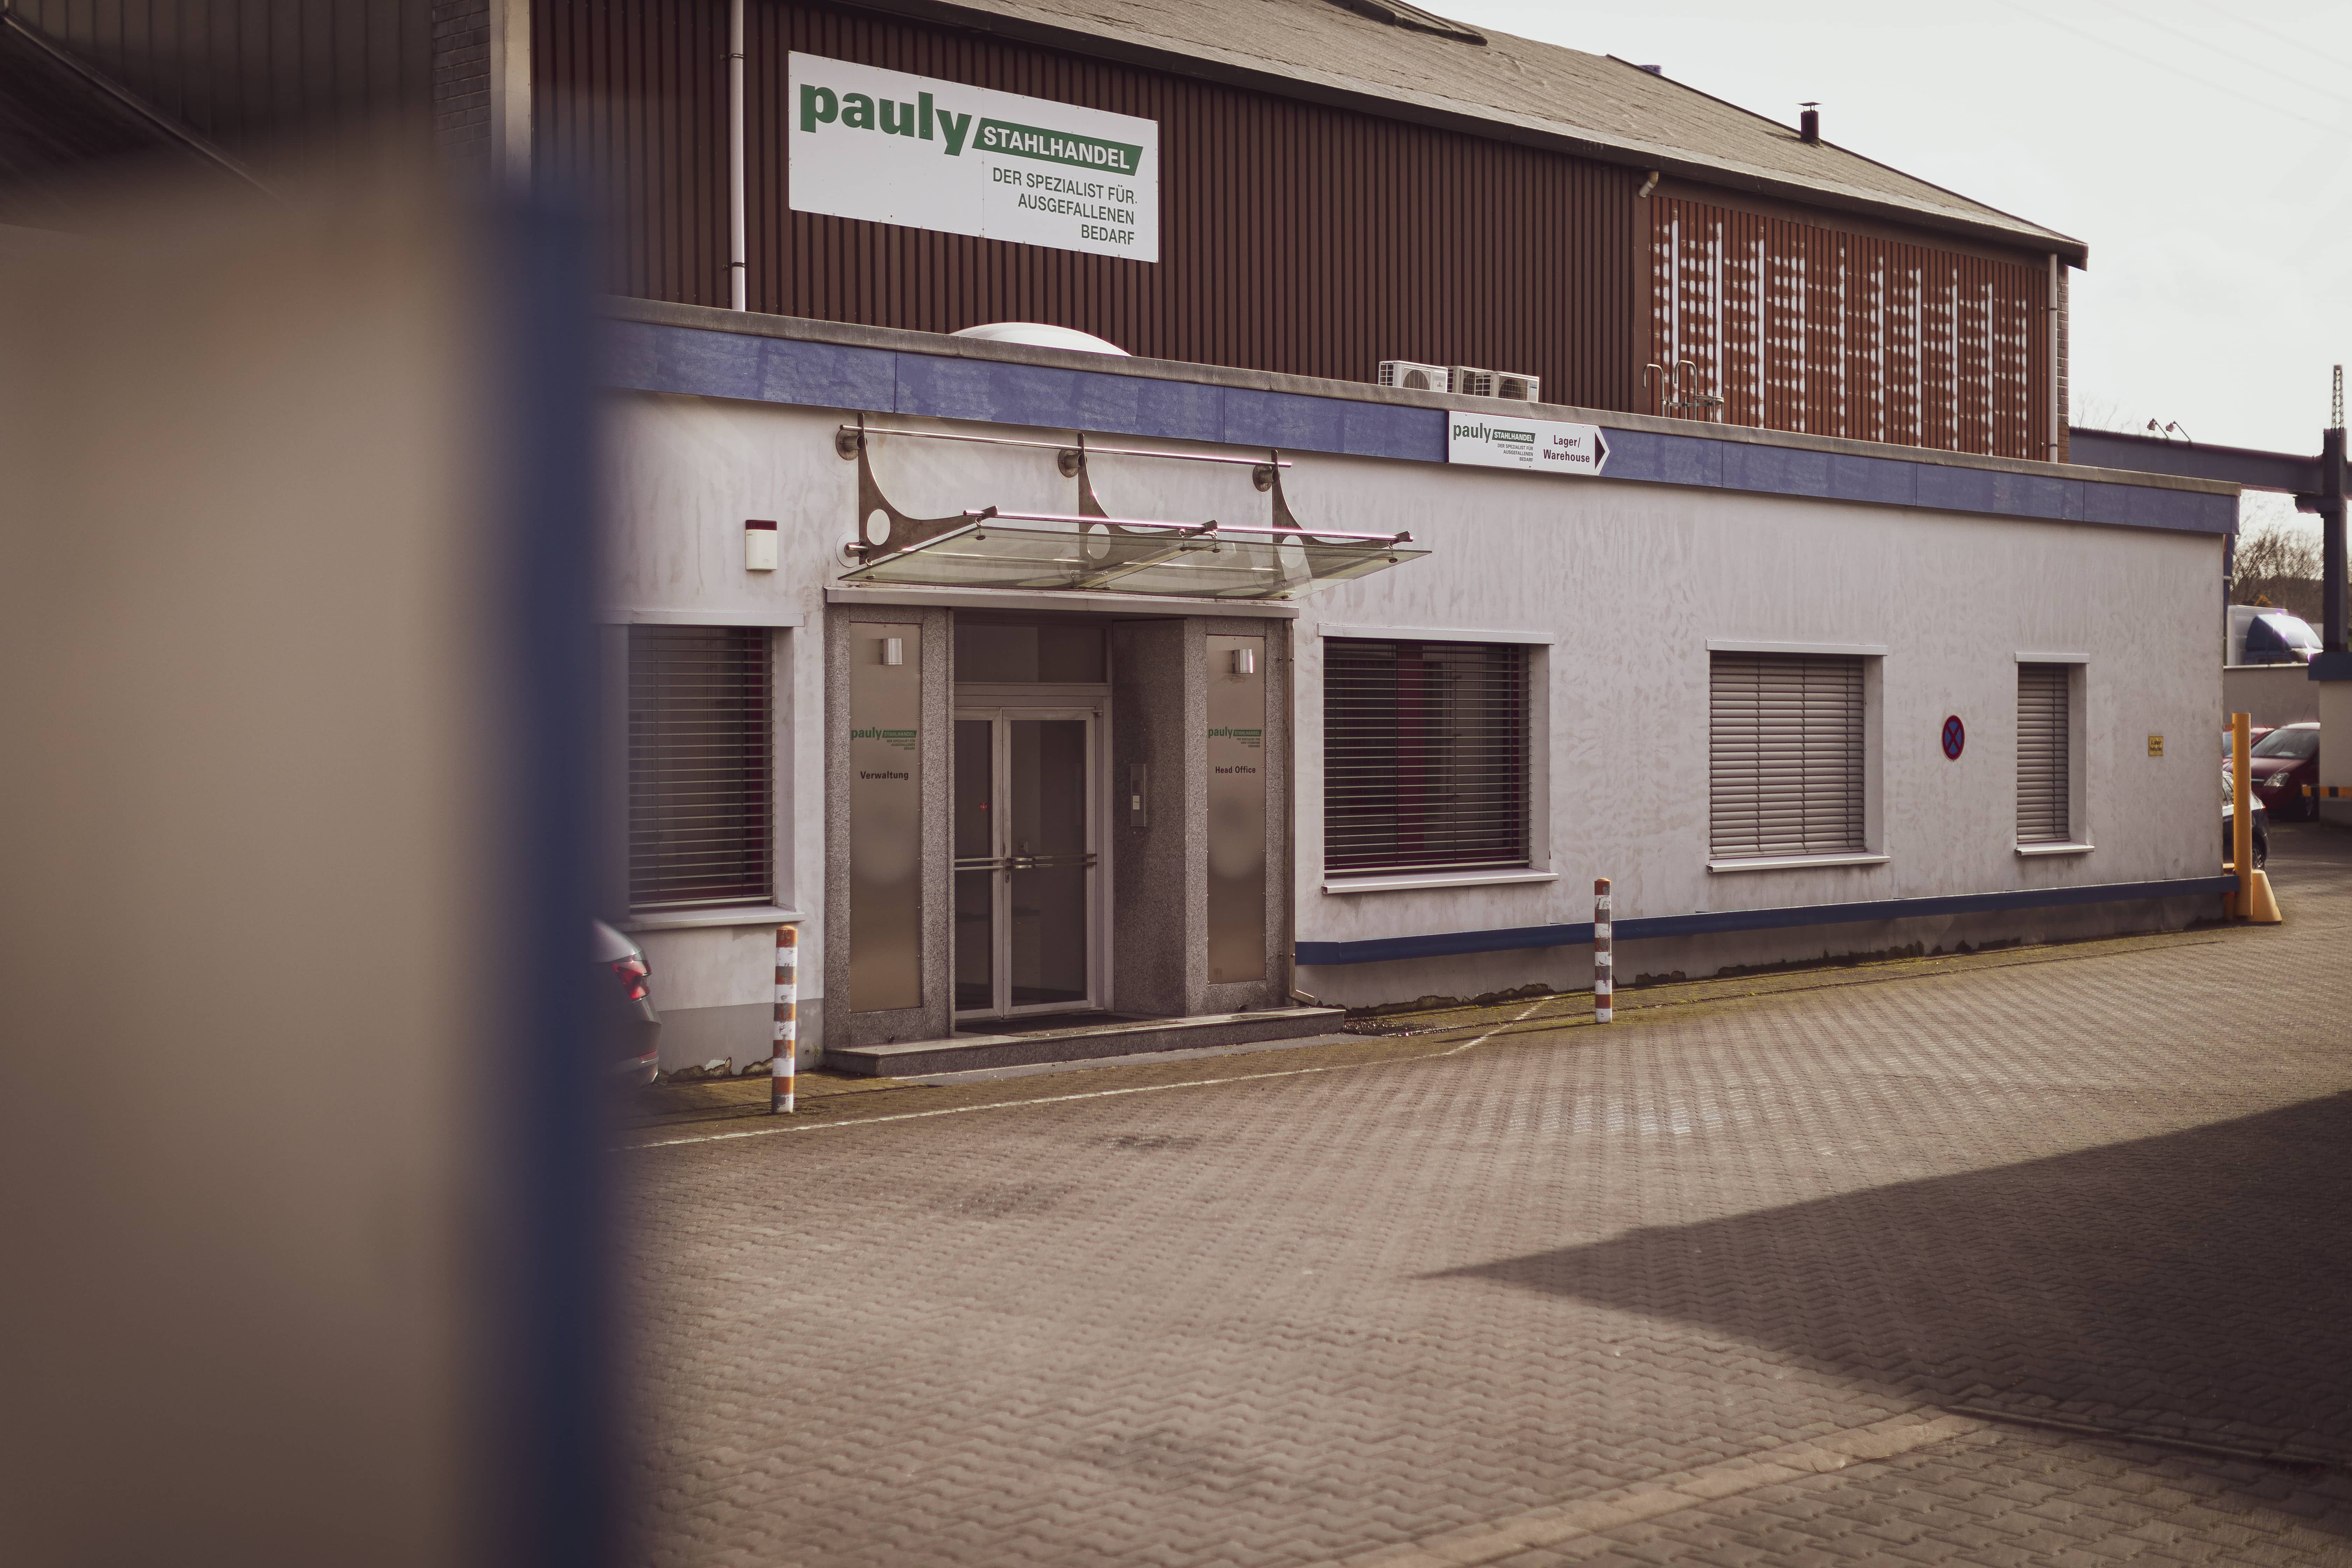 The main entrance to our steel processing center